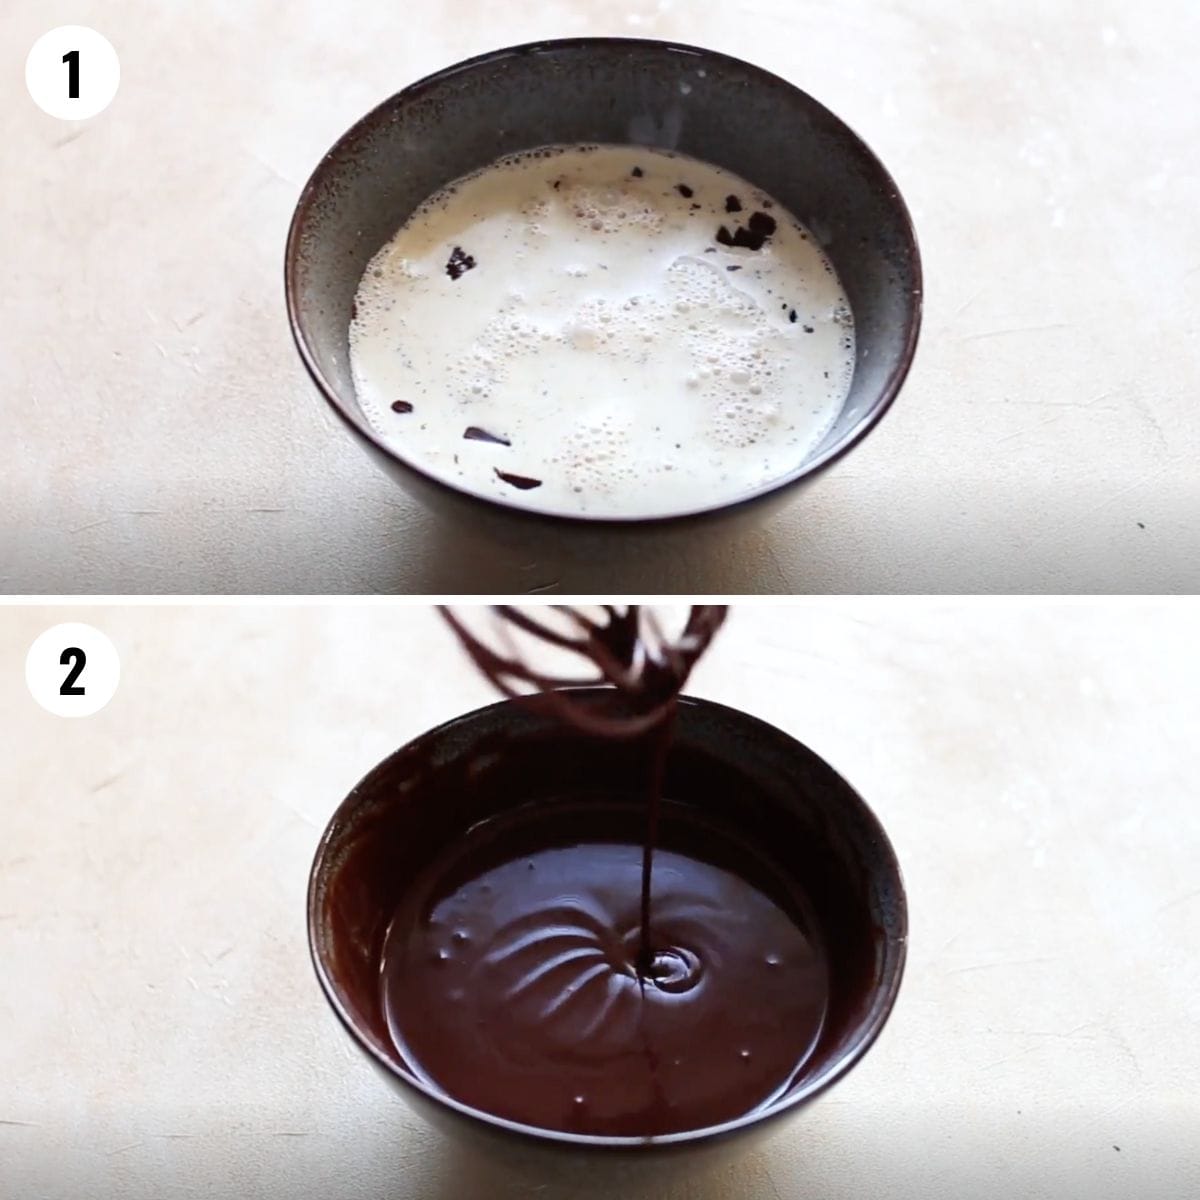 Ingredients in a bowl to make the chocolate ganache and then after it's melted and mixed together.